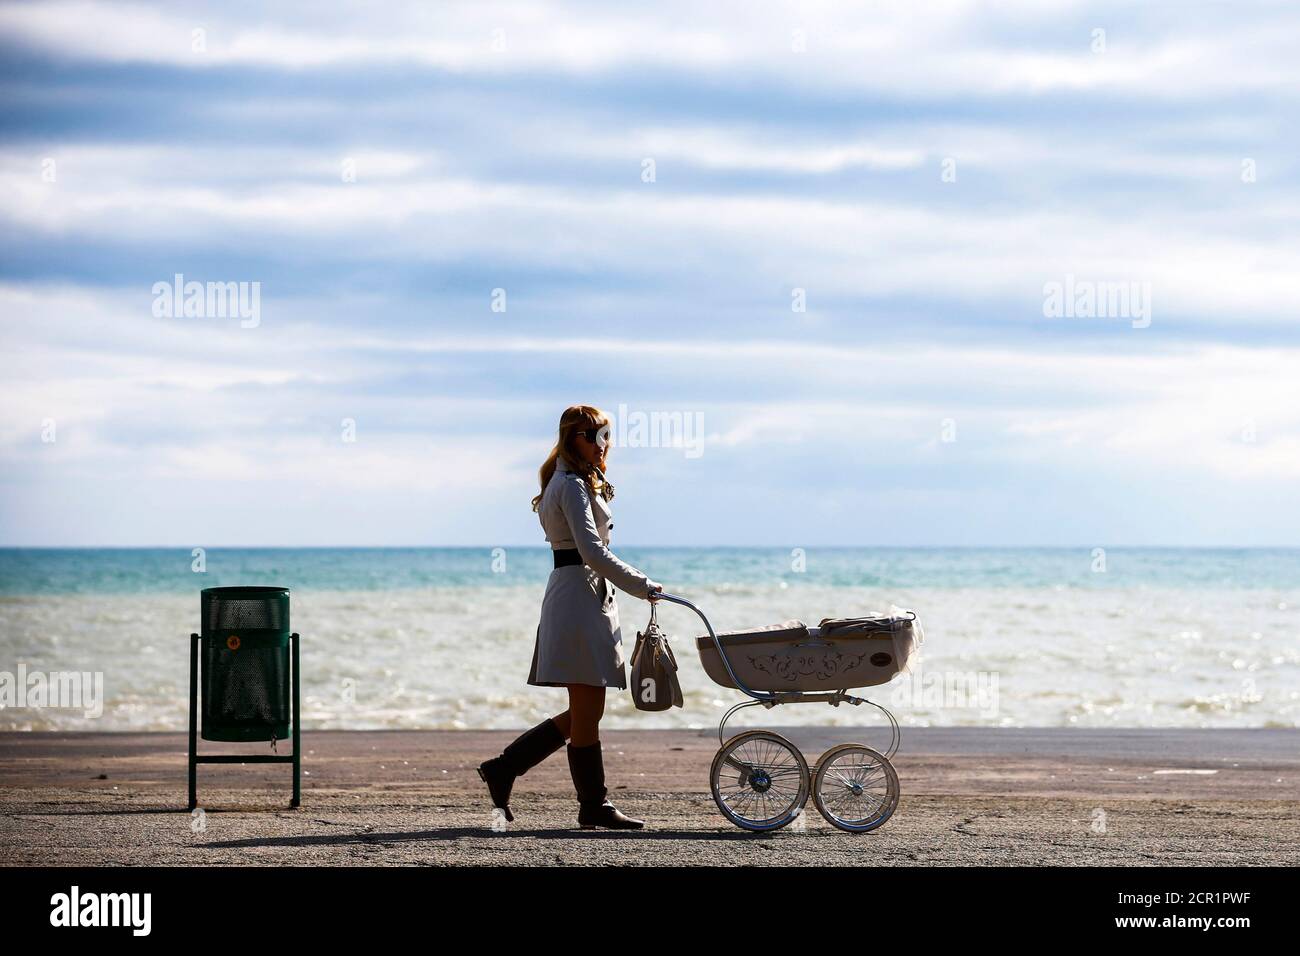 A woman pushes a pram along the embankment in the Black Sea resort town of Alushta March 11, 2014. Ukraine's Crimean peninsular evokes in many Russians and citizens of the former Soviet Union memories of summer holidays in the resorts and sanatoriums along its subtropical Black Sea coast. Crimea is also the place from where Christianity spread throughout what was then called Kievan Rus', a federation of Slavic tribes that later became Russia.  REUTERS/Thomas Peter (UKRAINE - Tags: POLITICS SOCIETY TRAVEL TPX IMAGES OF THE DAY) Stock Photo